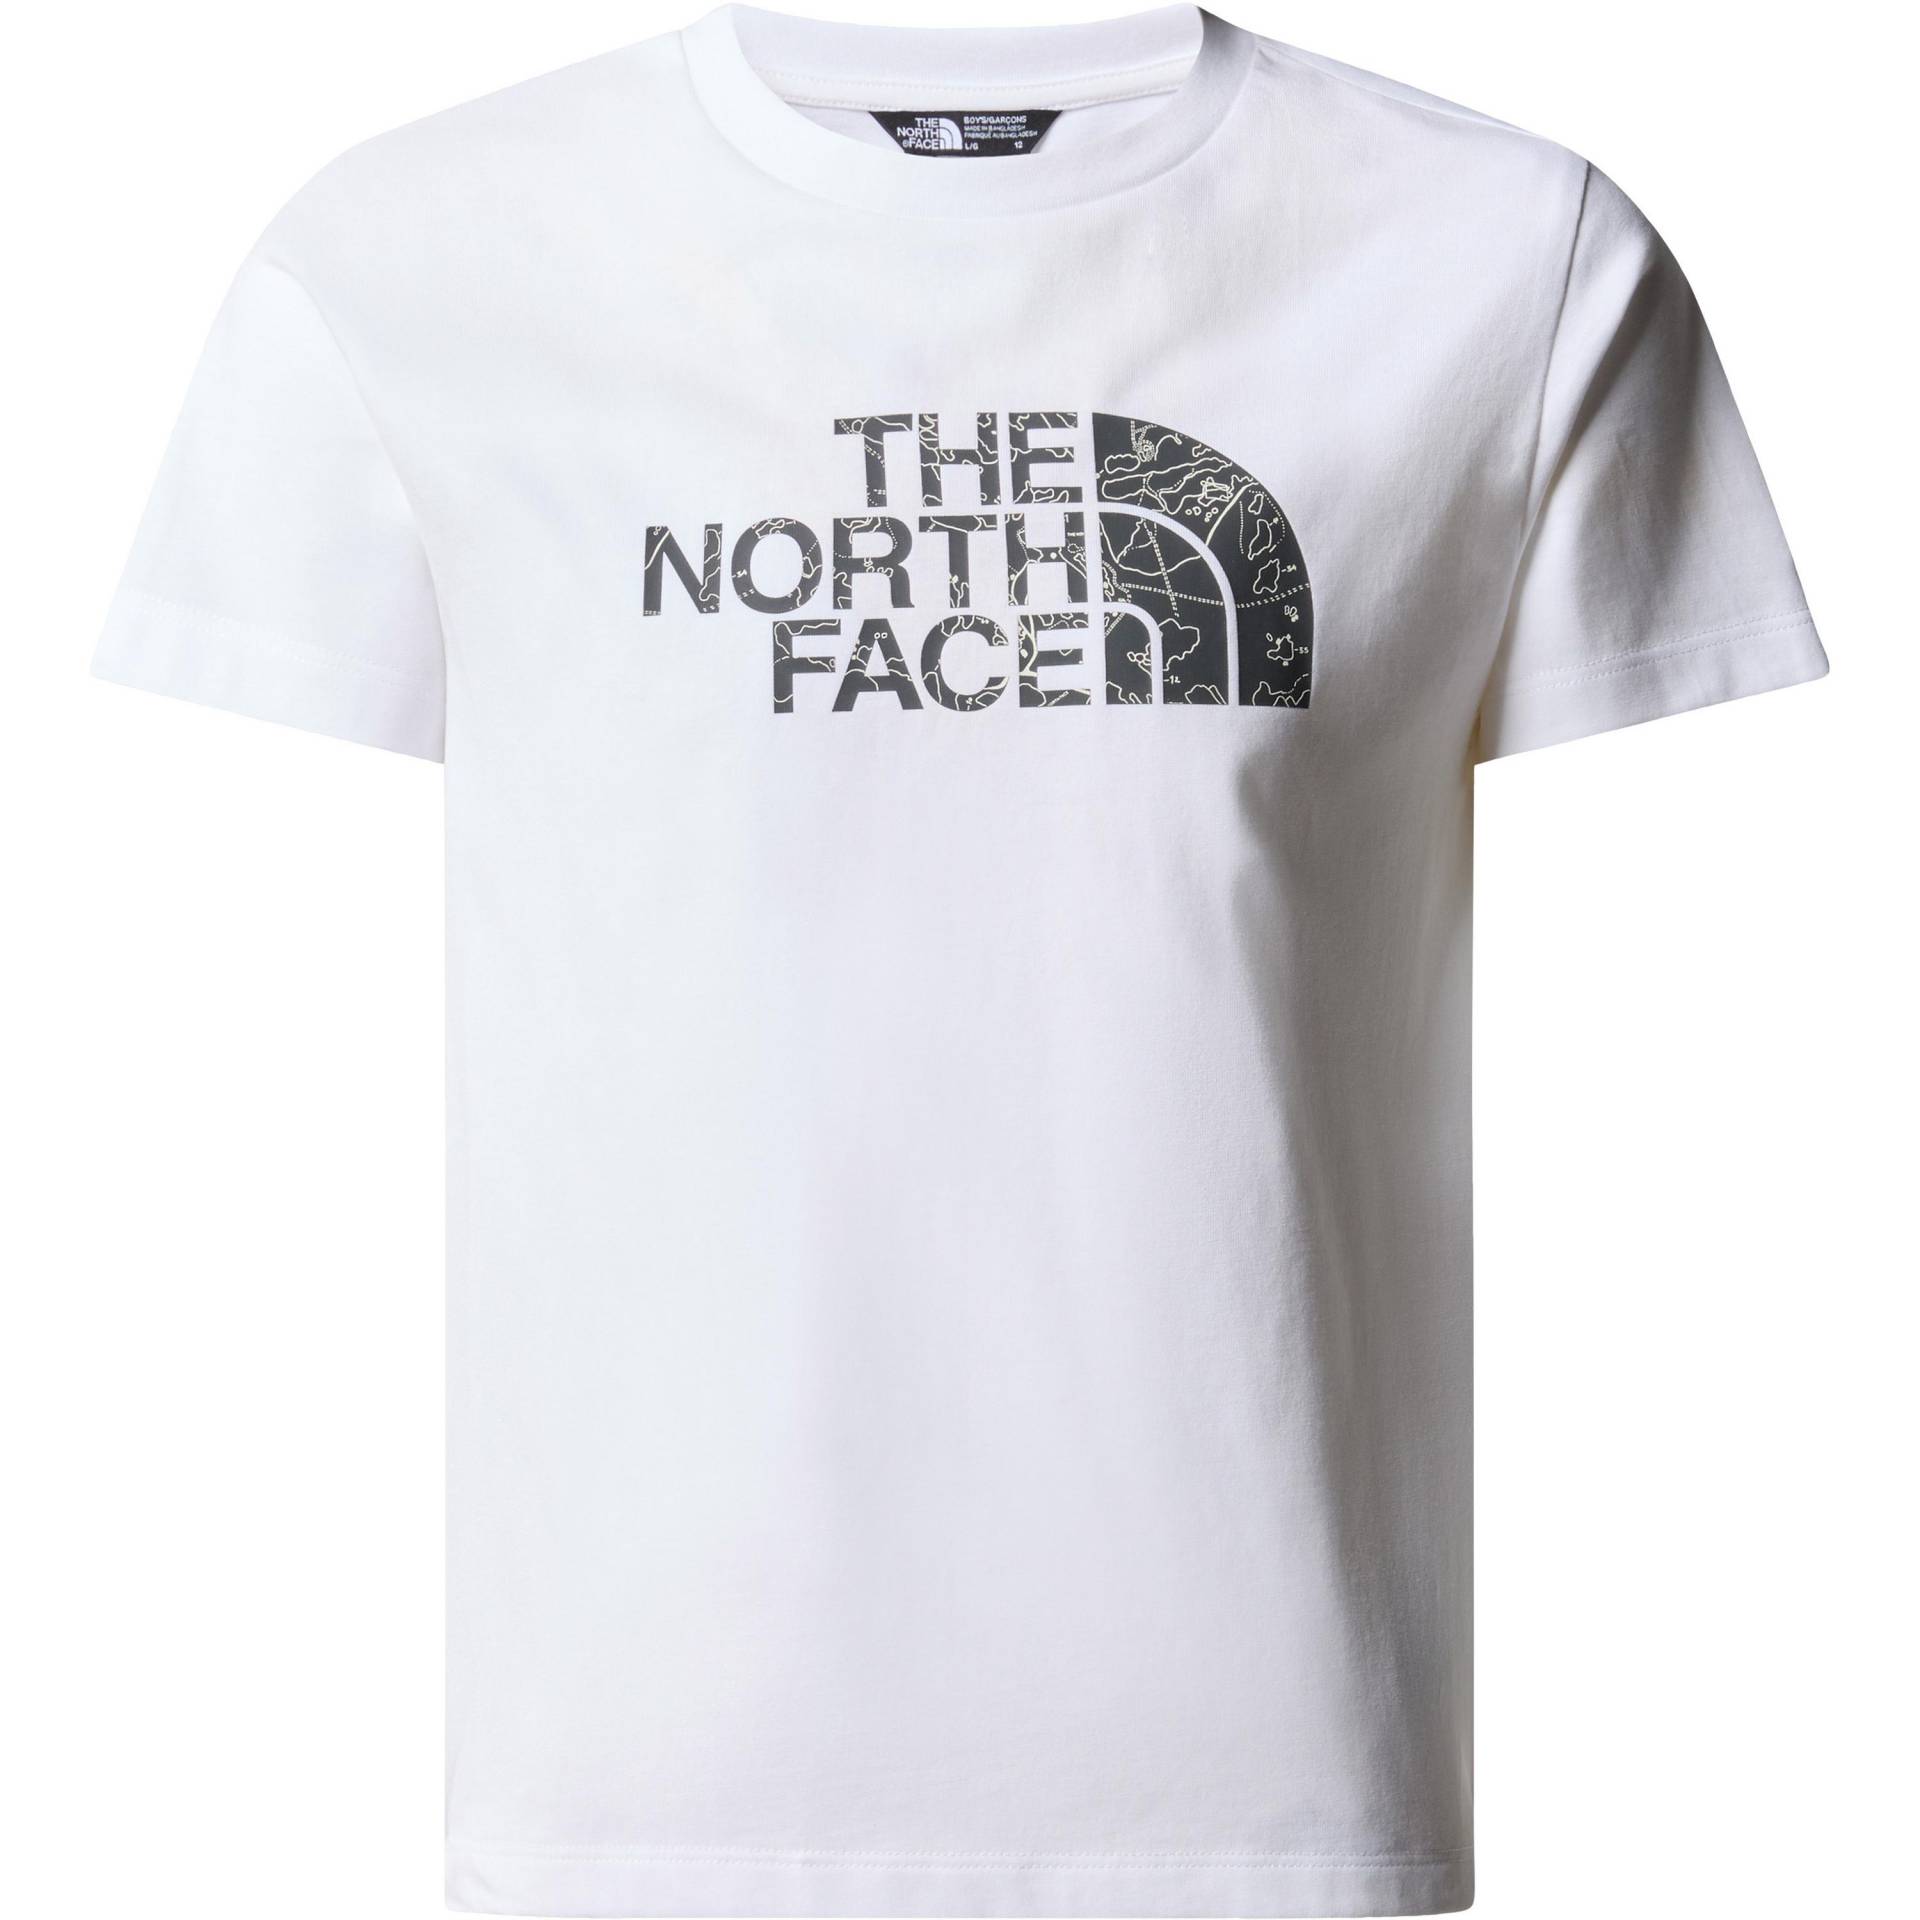 The North Face EASY T-Shirt Kinder von The North Face